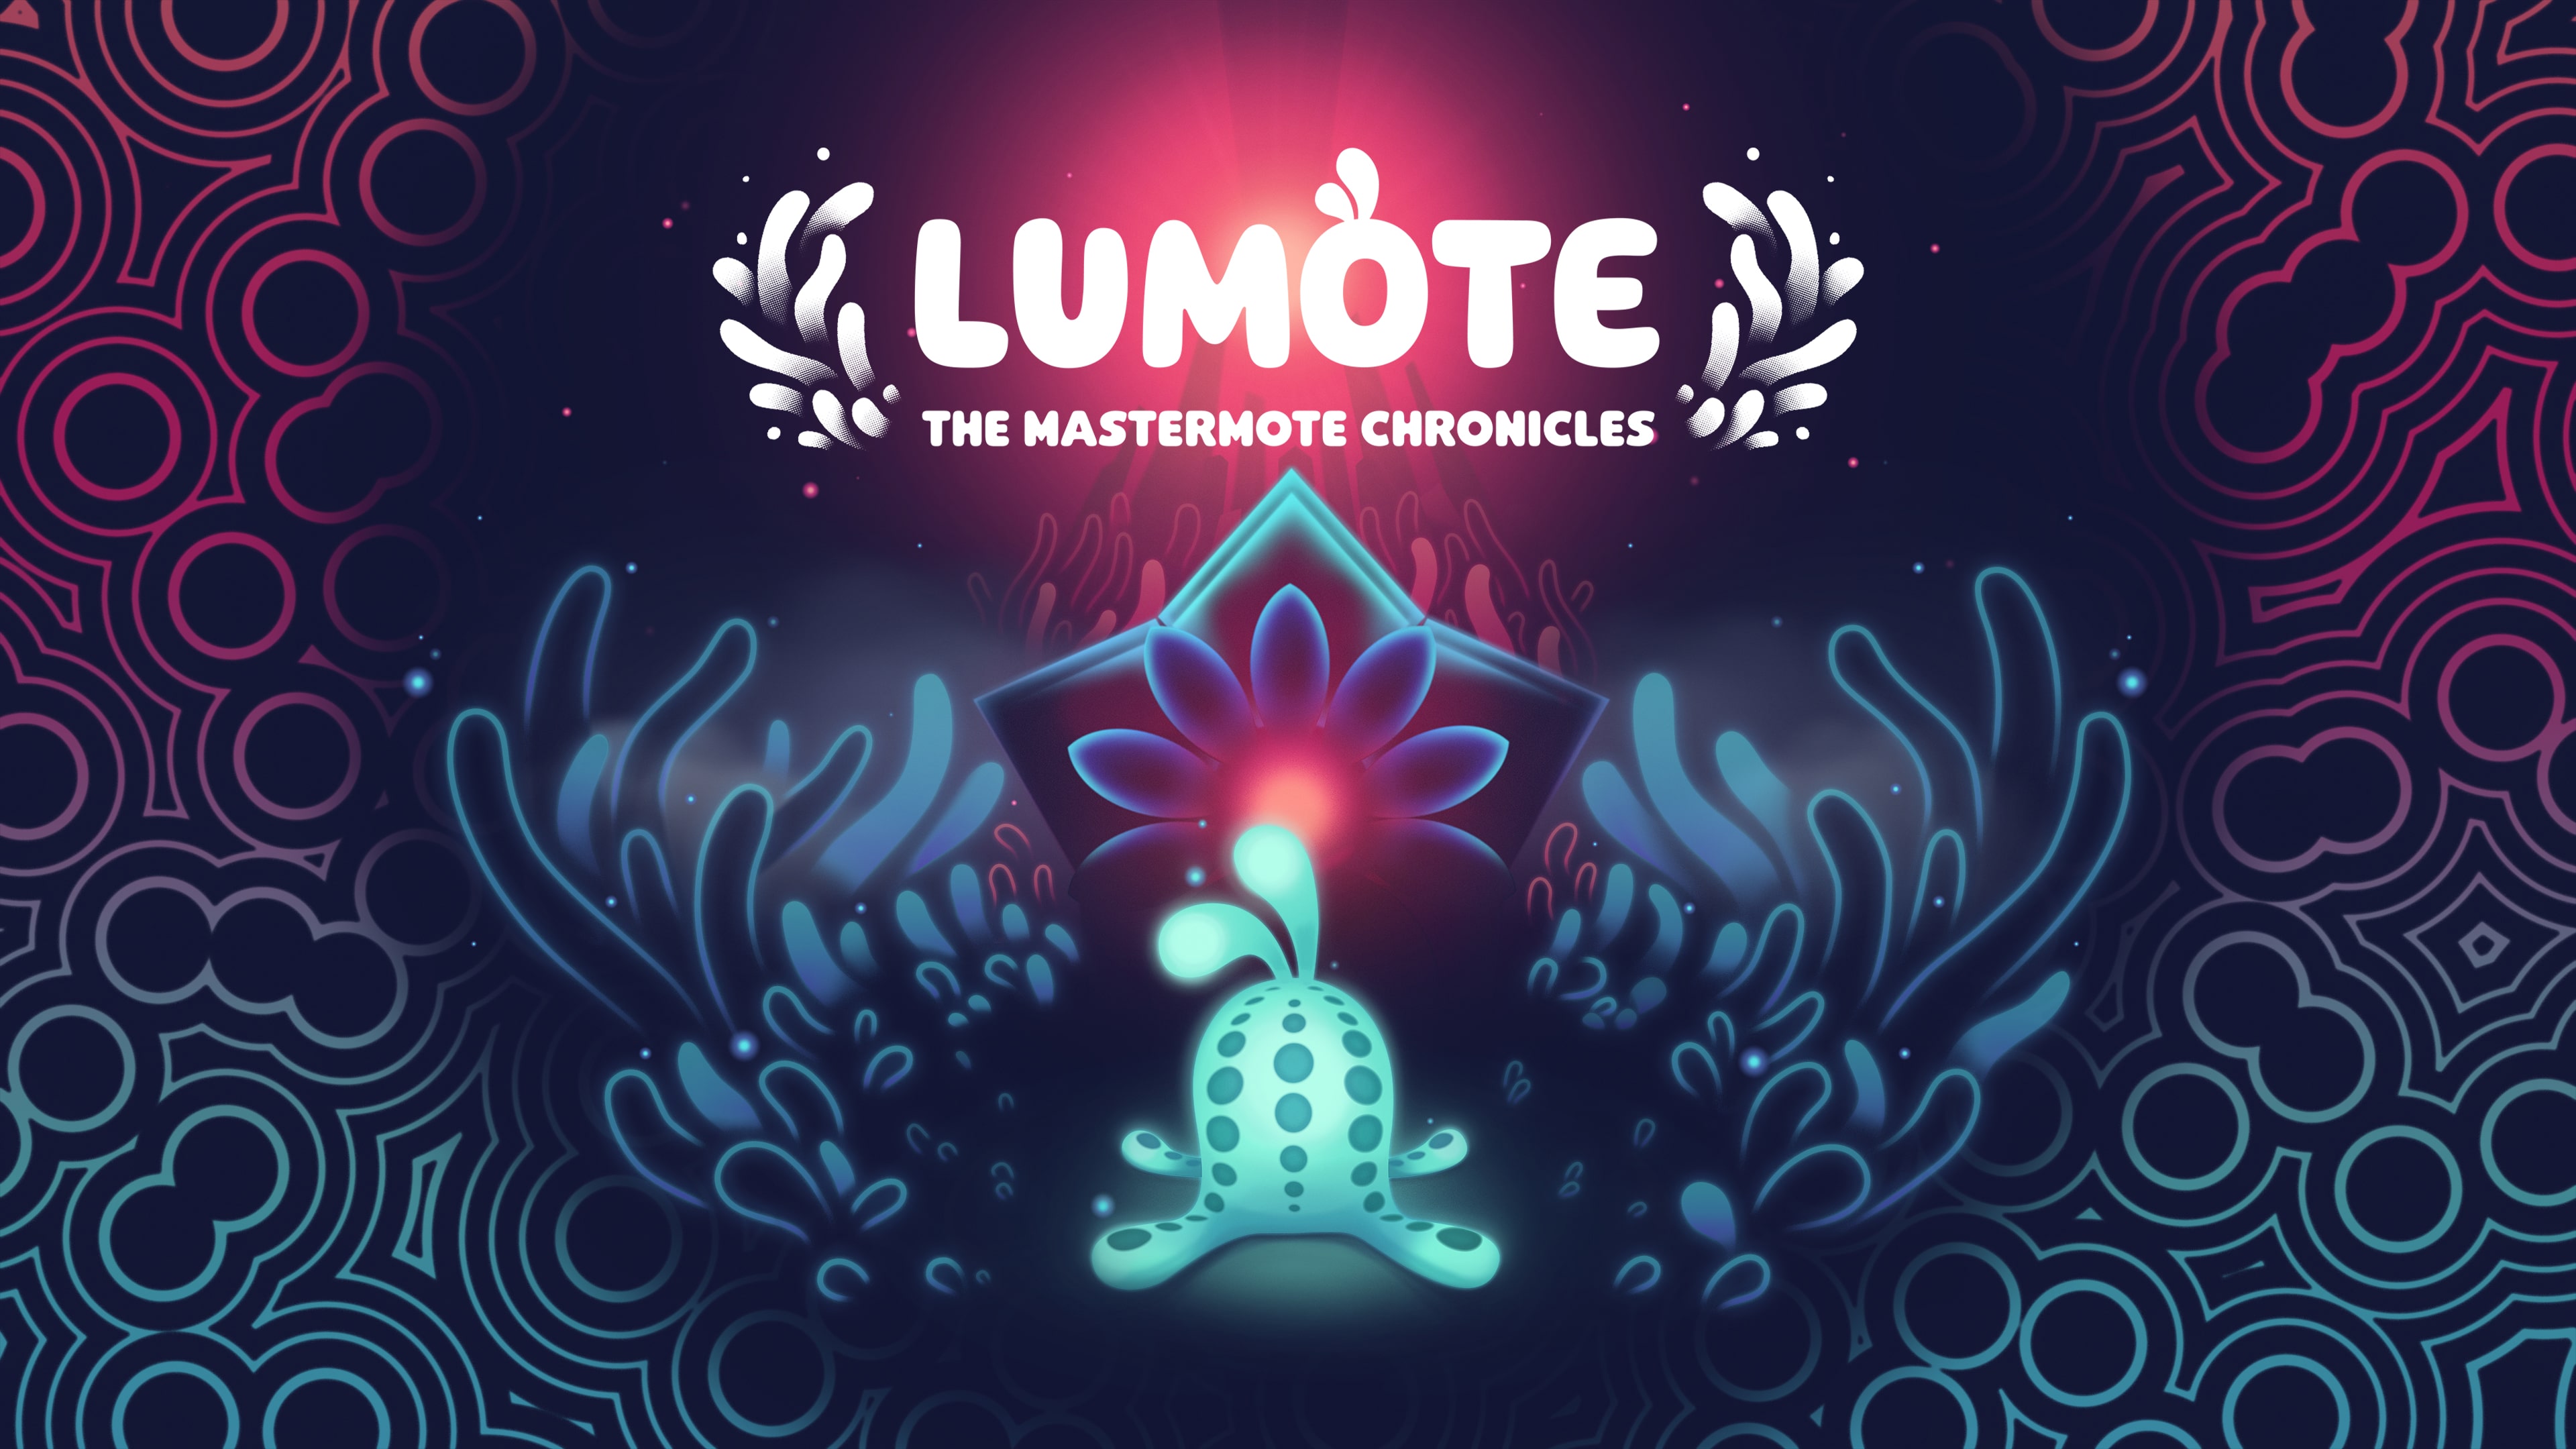 Lumote: The Mastermote Chronicles (Simplified Chinese, English, Korean, Thai, Japanese, Traditional Chinese)